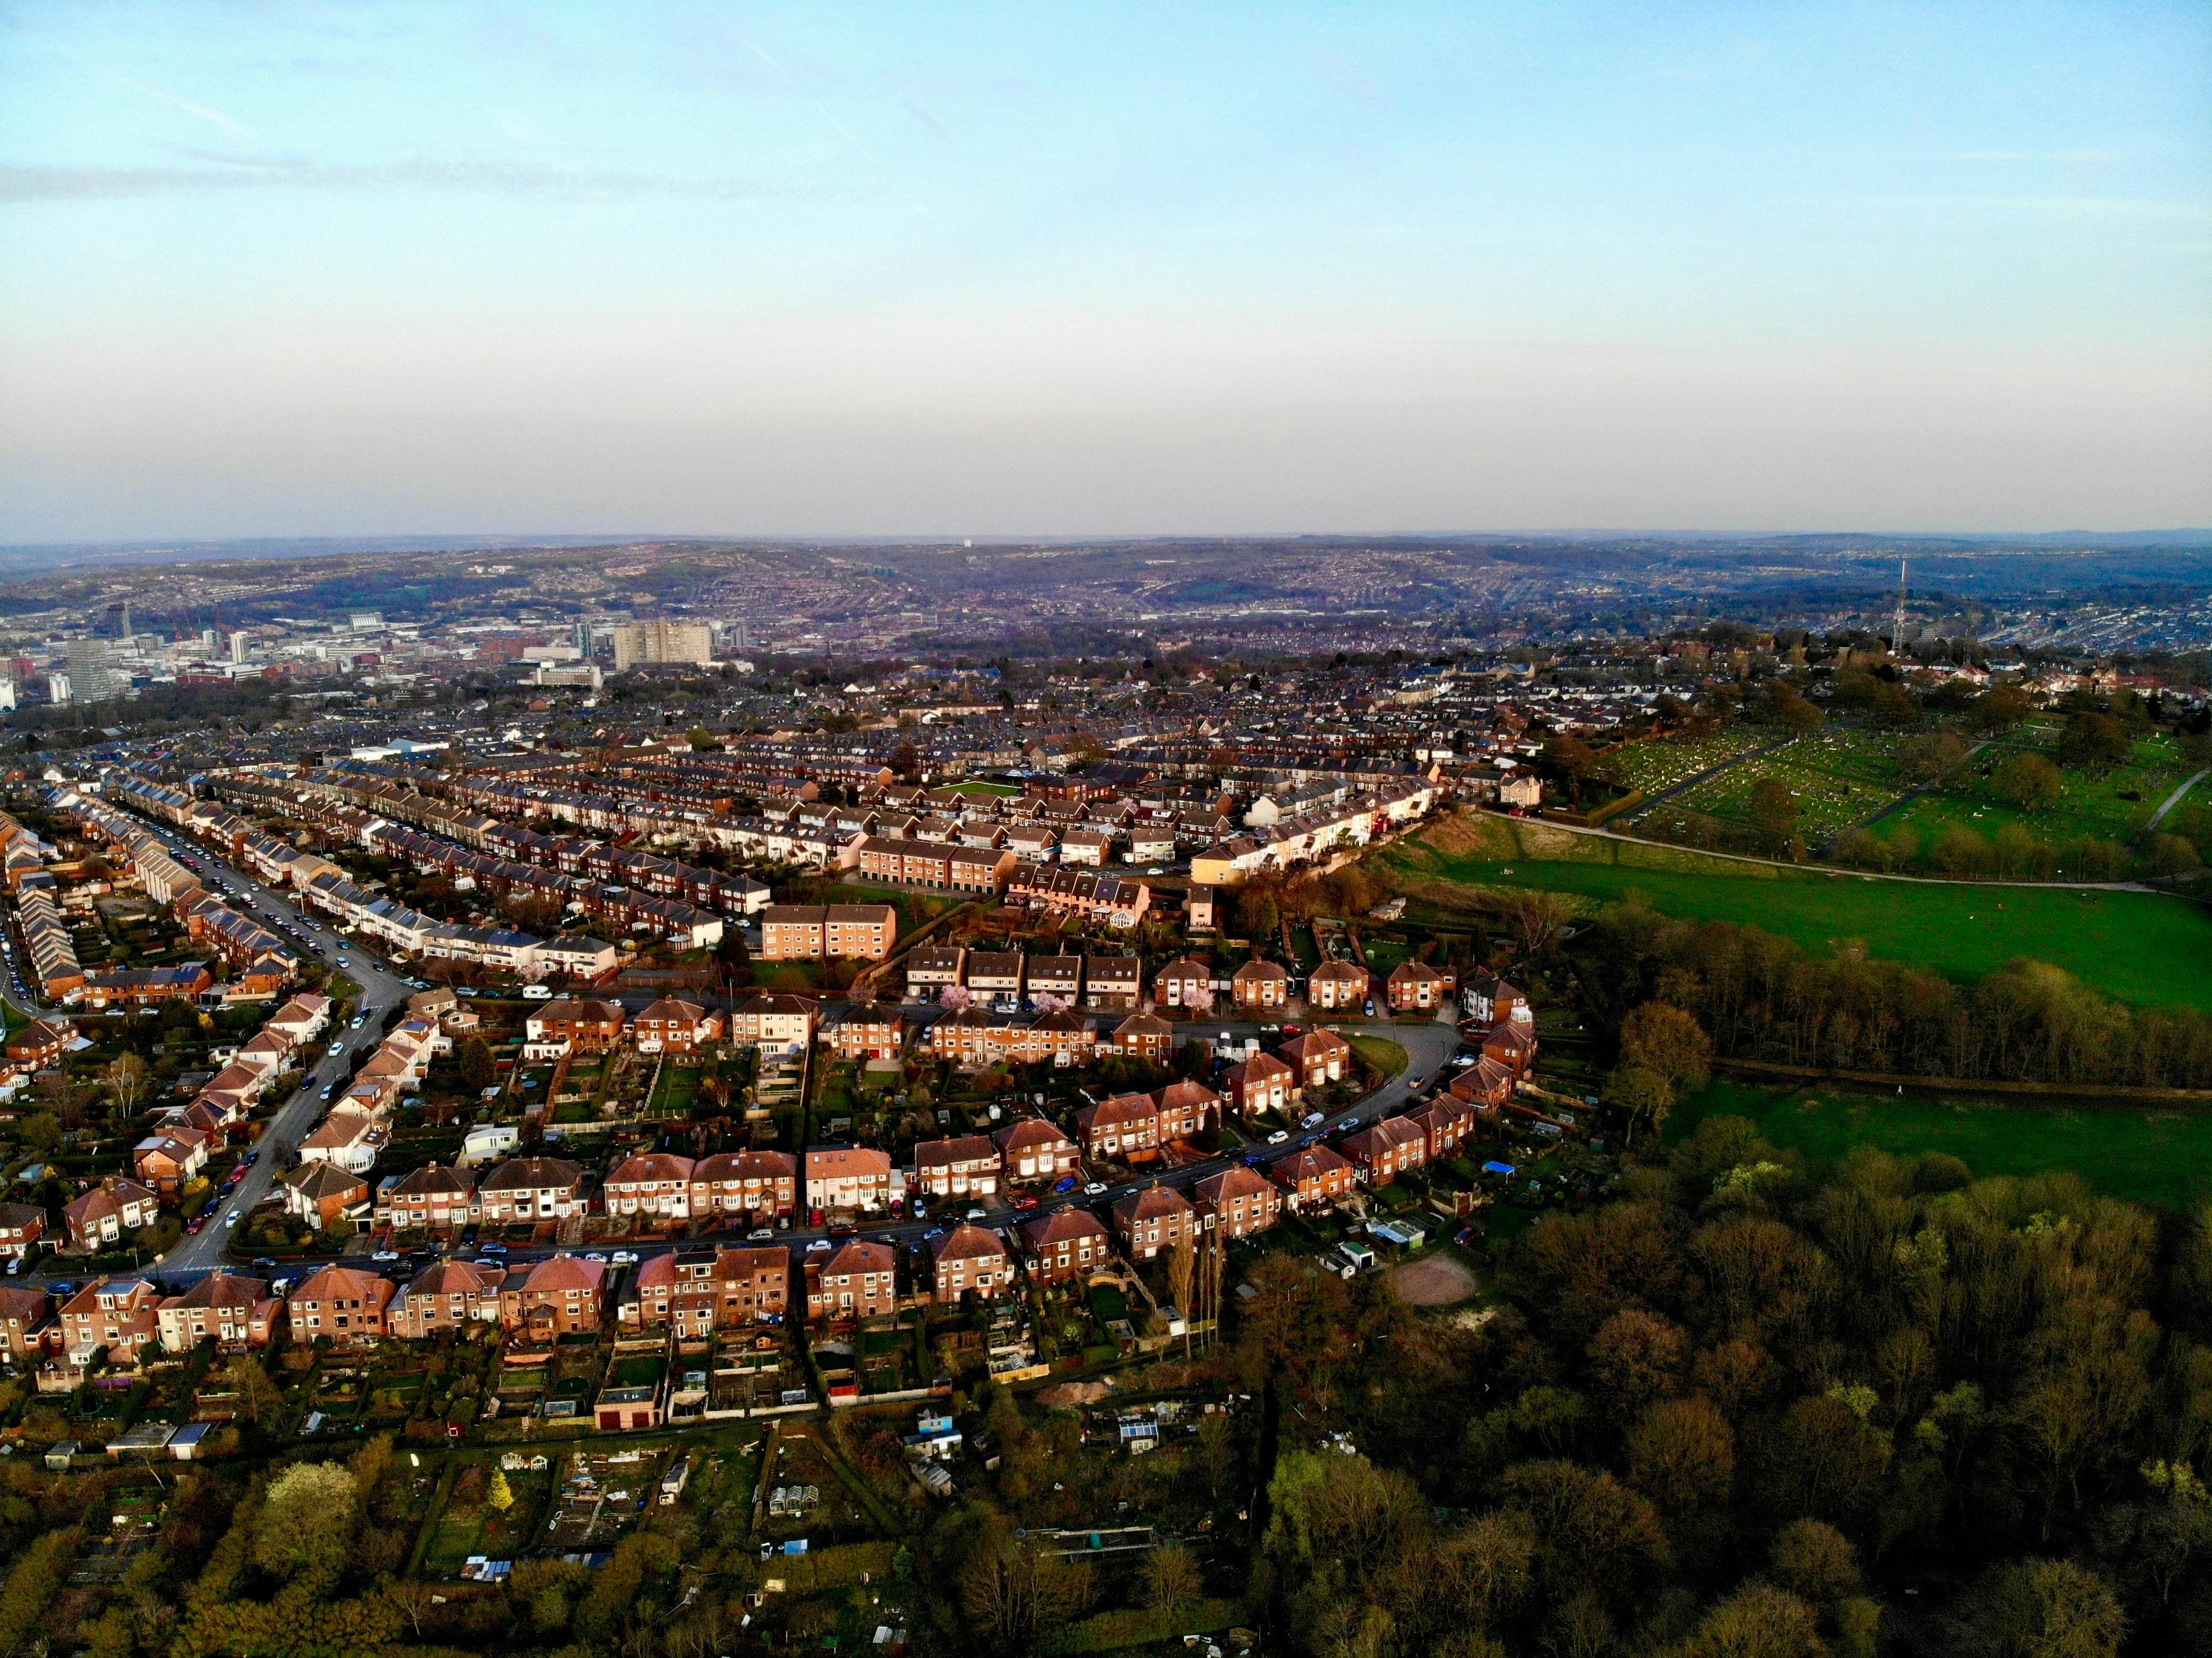 Aeriel view of Crookes in Sheffield